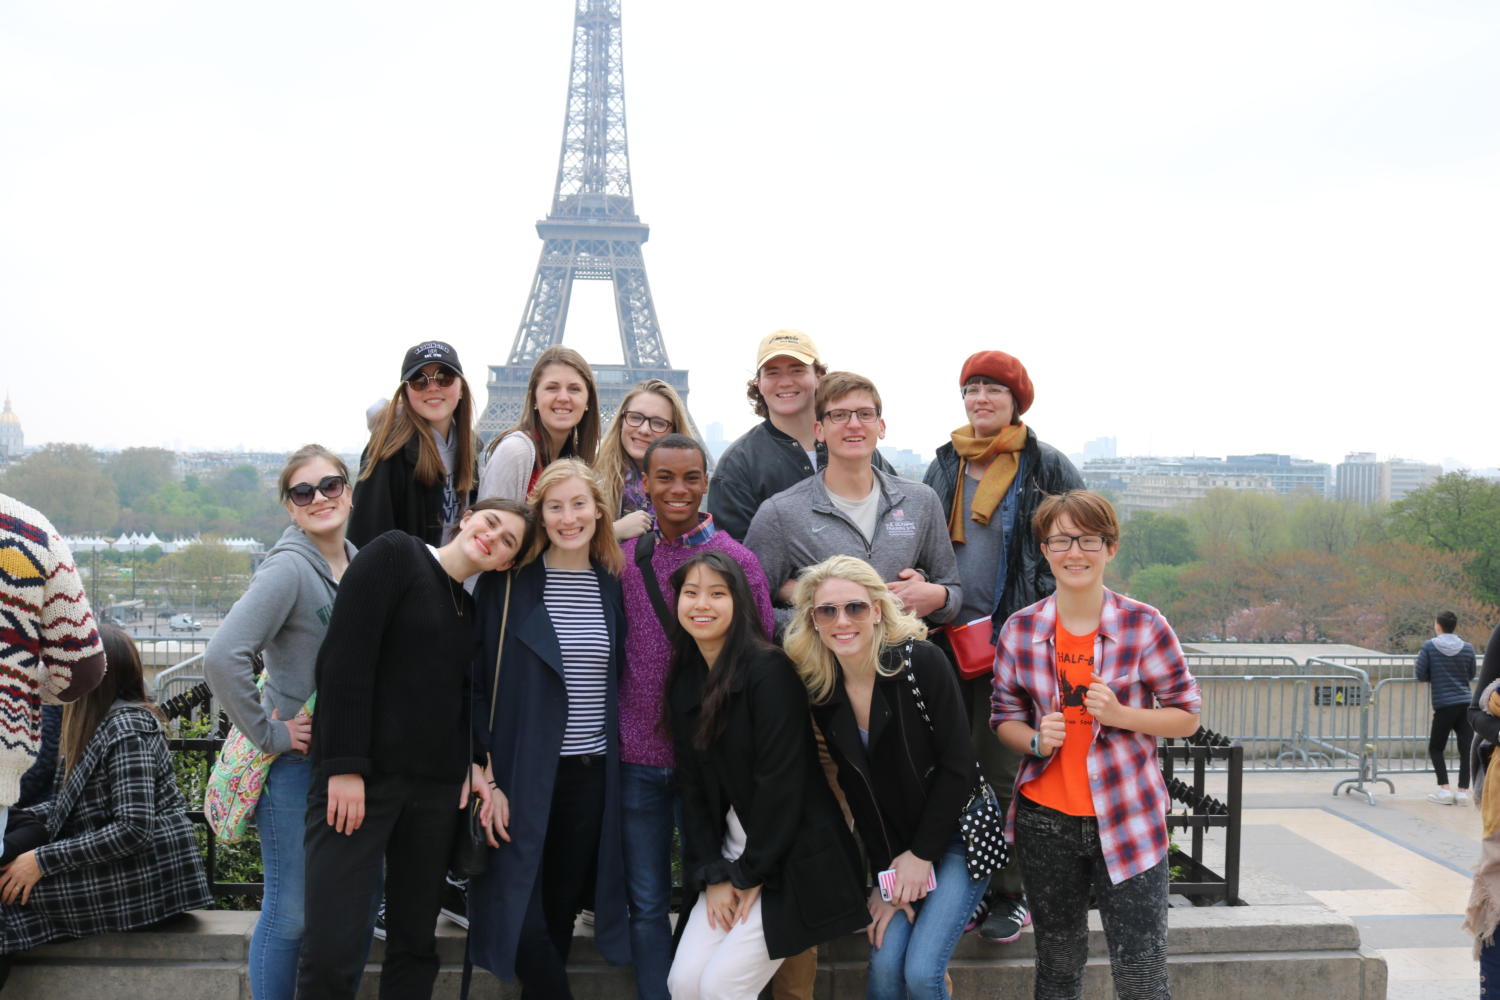 France+explorers+pay+a+visit+to+the+iconic+Eiffel+Tower+upon+departing+from+Charles+De+Gaulle+Airport.